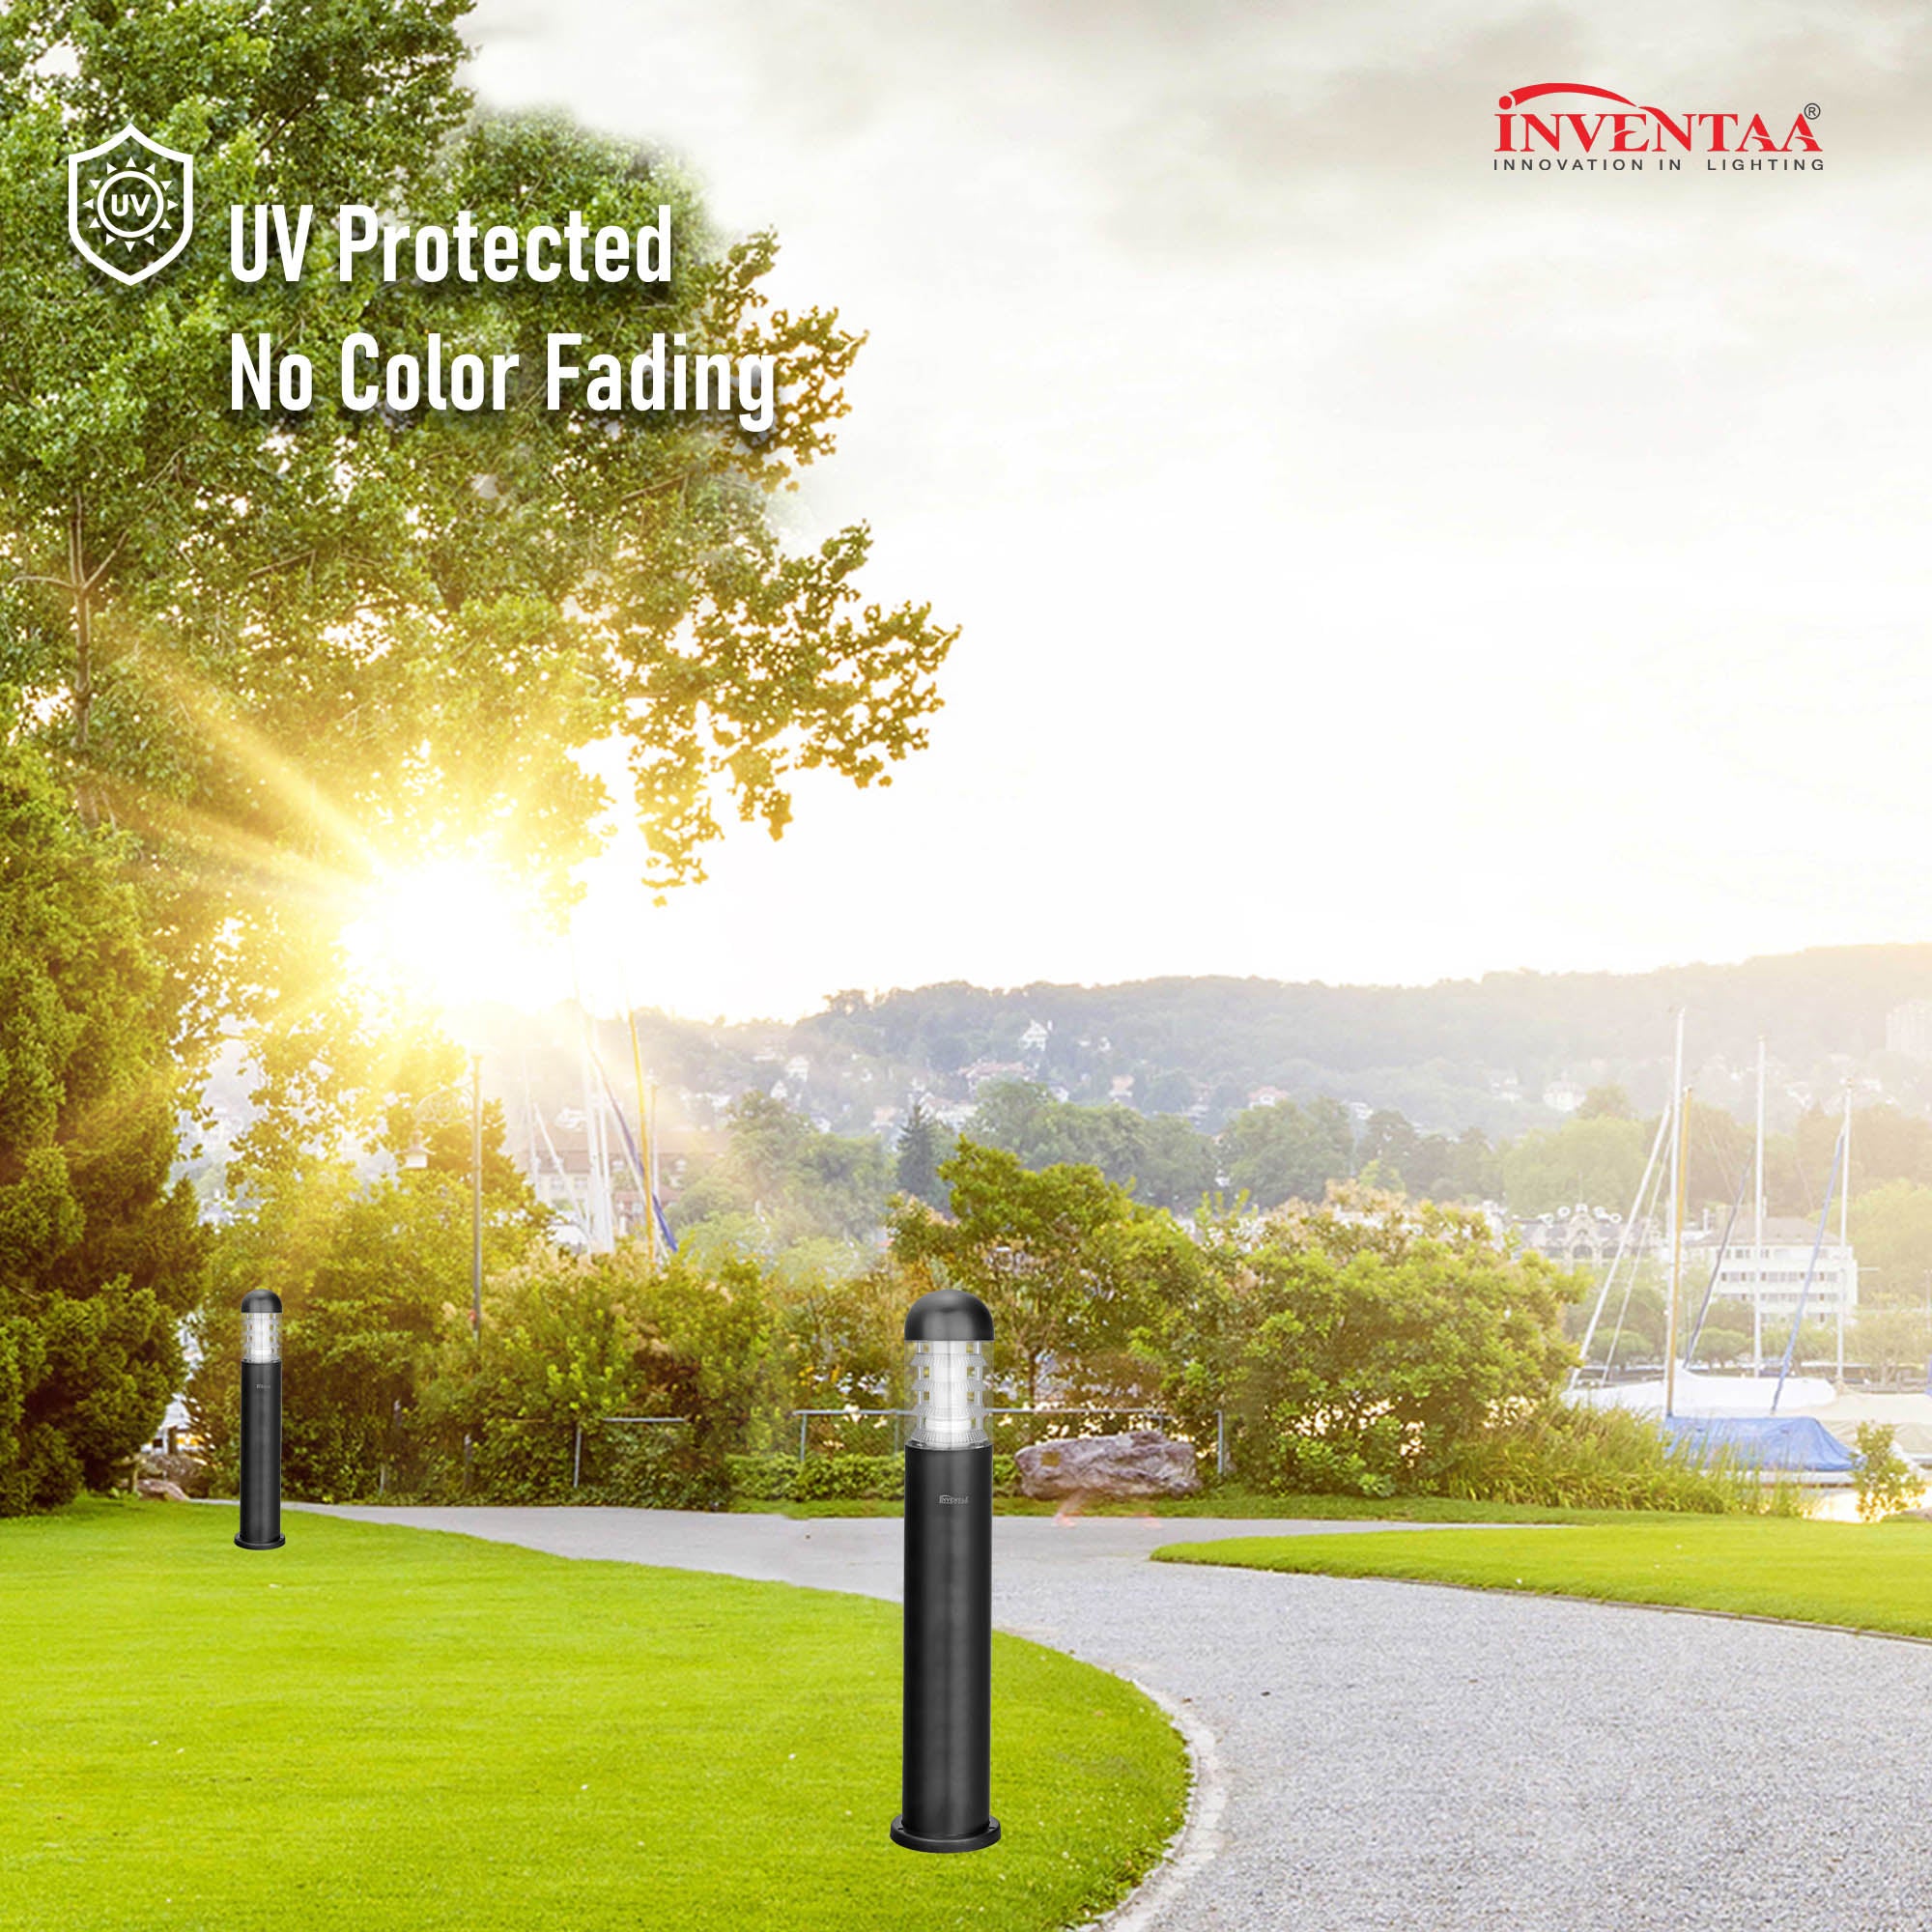 Electra 1.5 feet led garden bollard light featuring its UV protection and no color fading resitance for enduring performance #size_1.5 feet